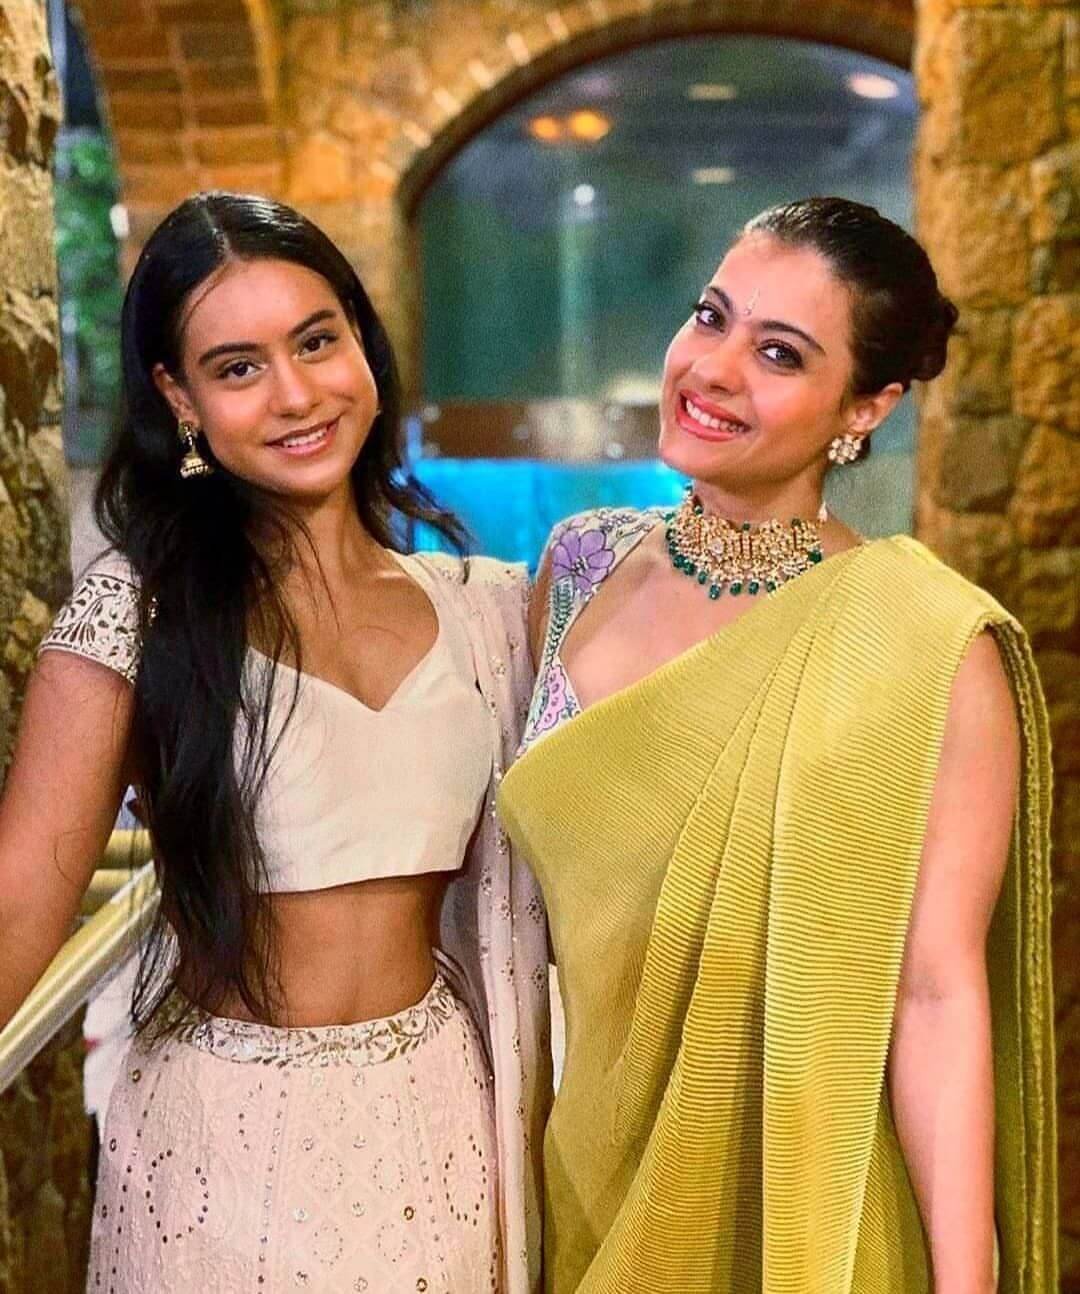 Daughters of Bollywood Star